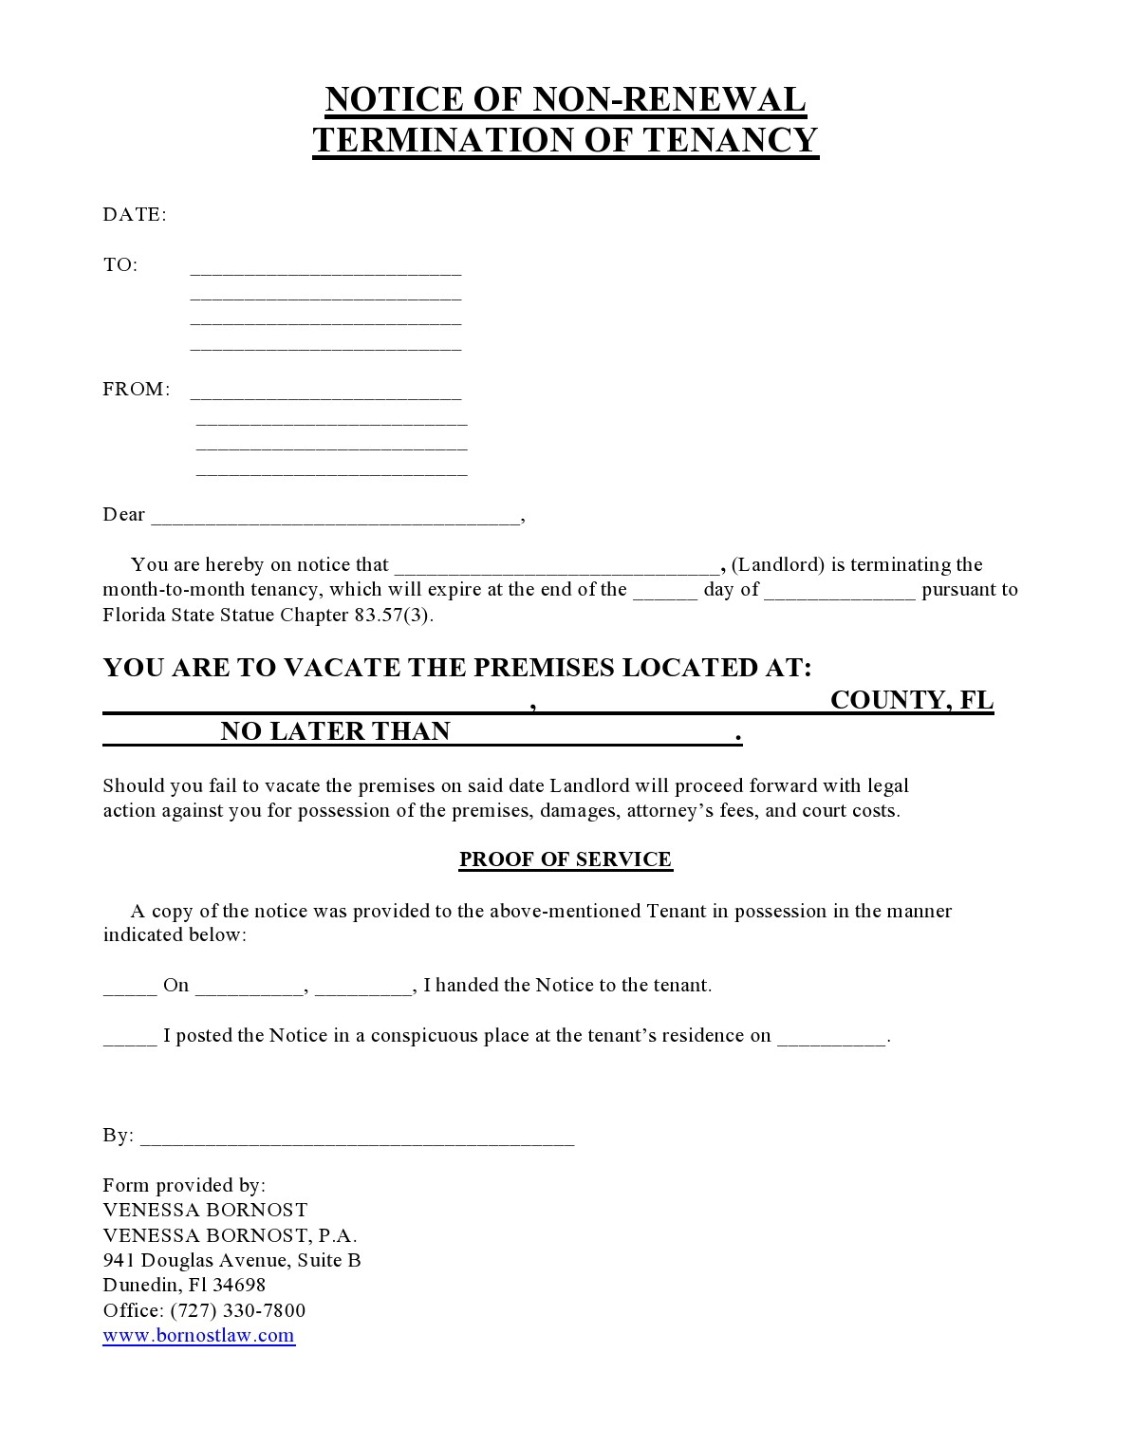 non renewal termination of tenancy letter template